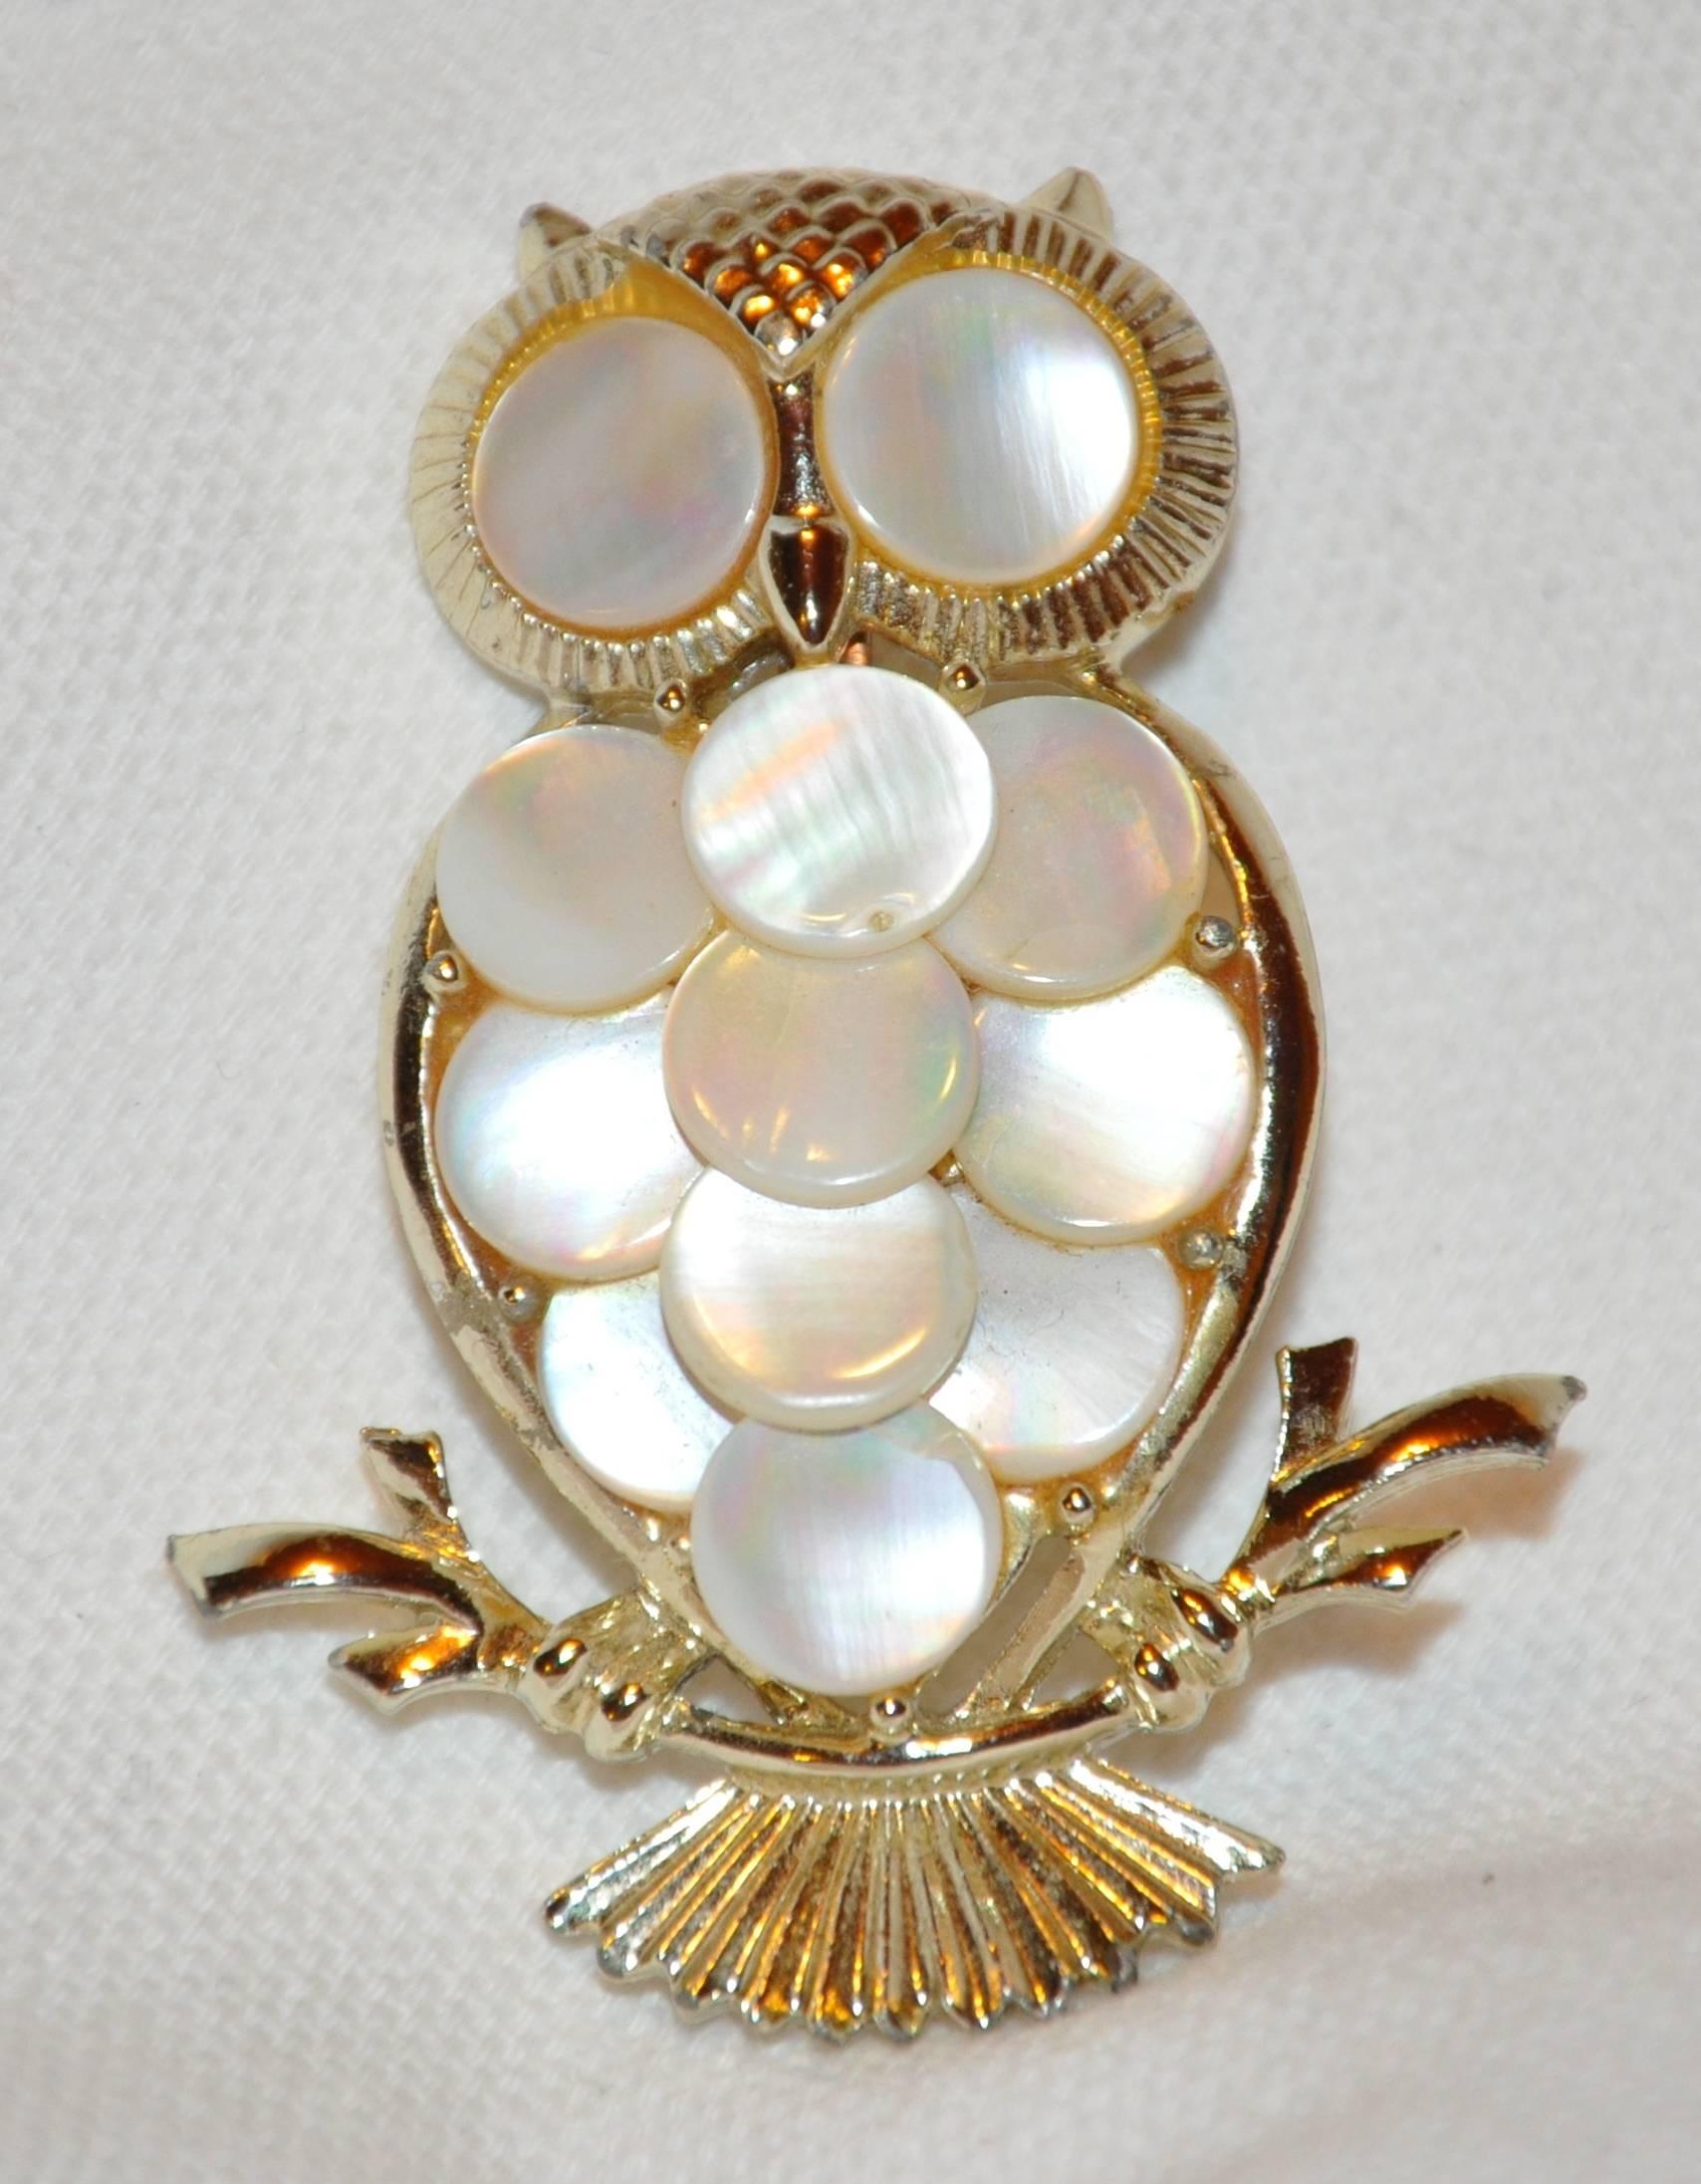       This wonderfully detailed "Owl" set in gilded gold vermeil hardware is accented with mother-of-pearl. The brooch measures 2" x 1 1/2", made in United States.